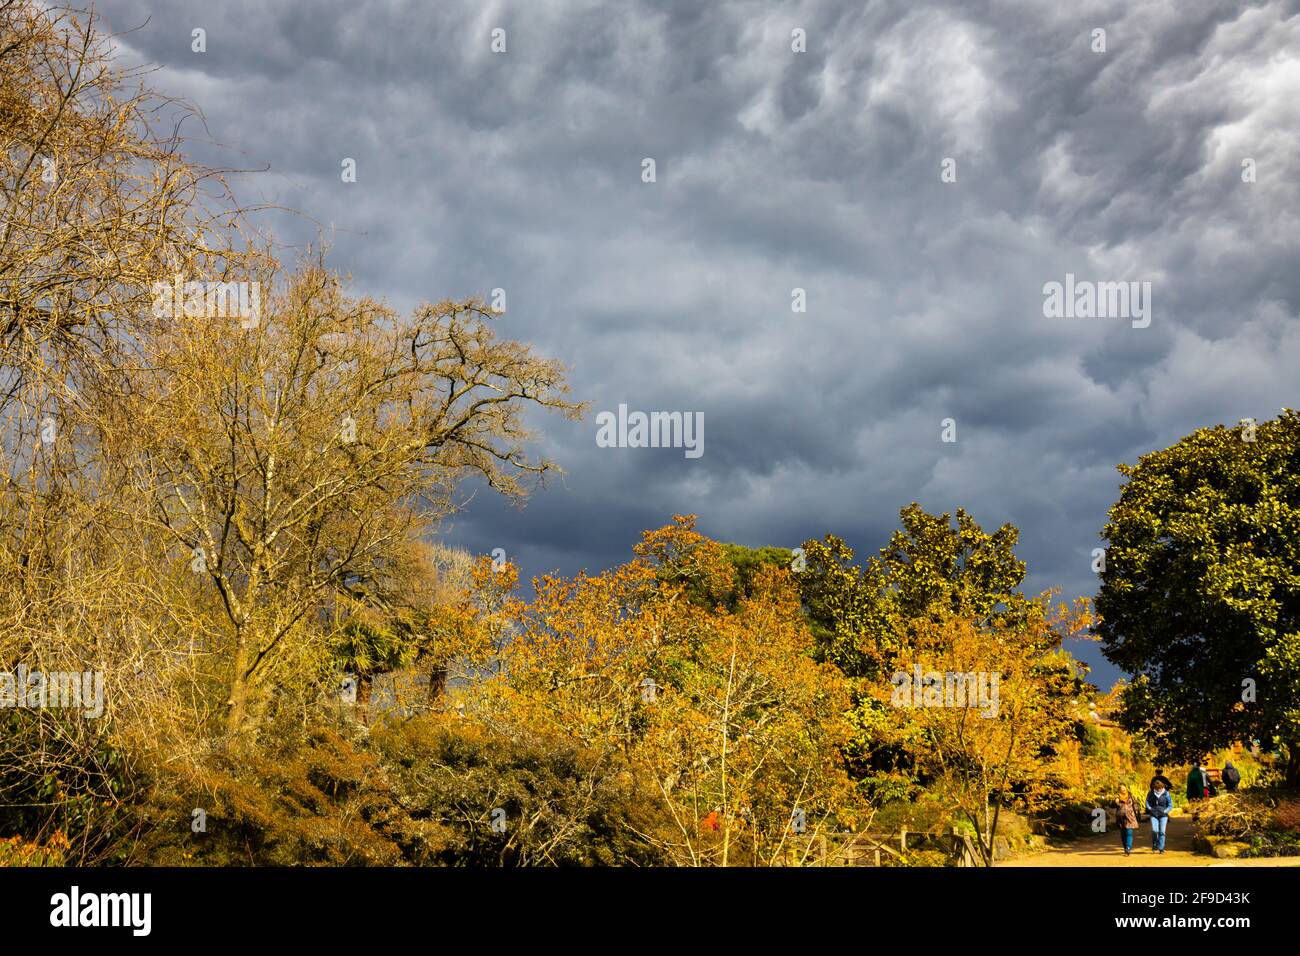 Dramatic sky with grey storm clouds over frost damaged magnolia trees in RHS Garden, Wisley, Surrey, south-east England in spring before heavy rain Stock Photo